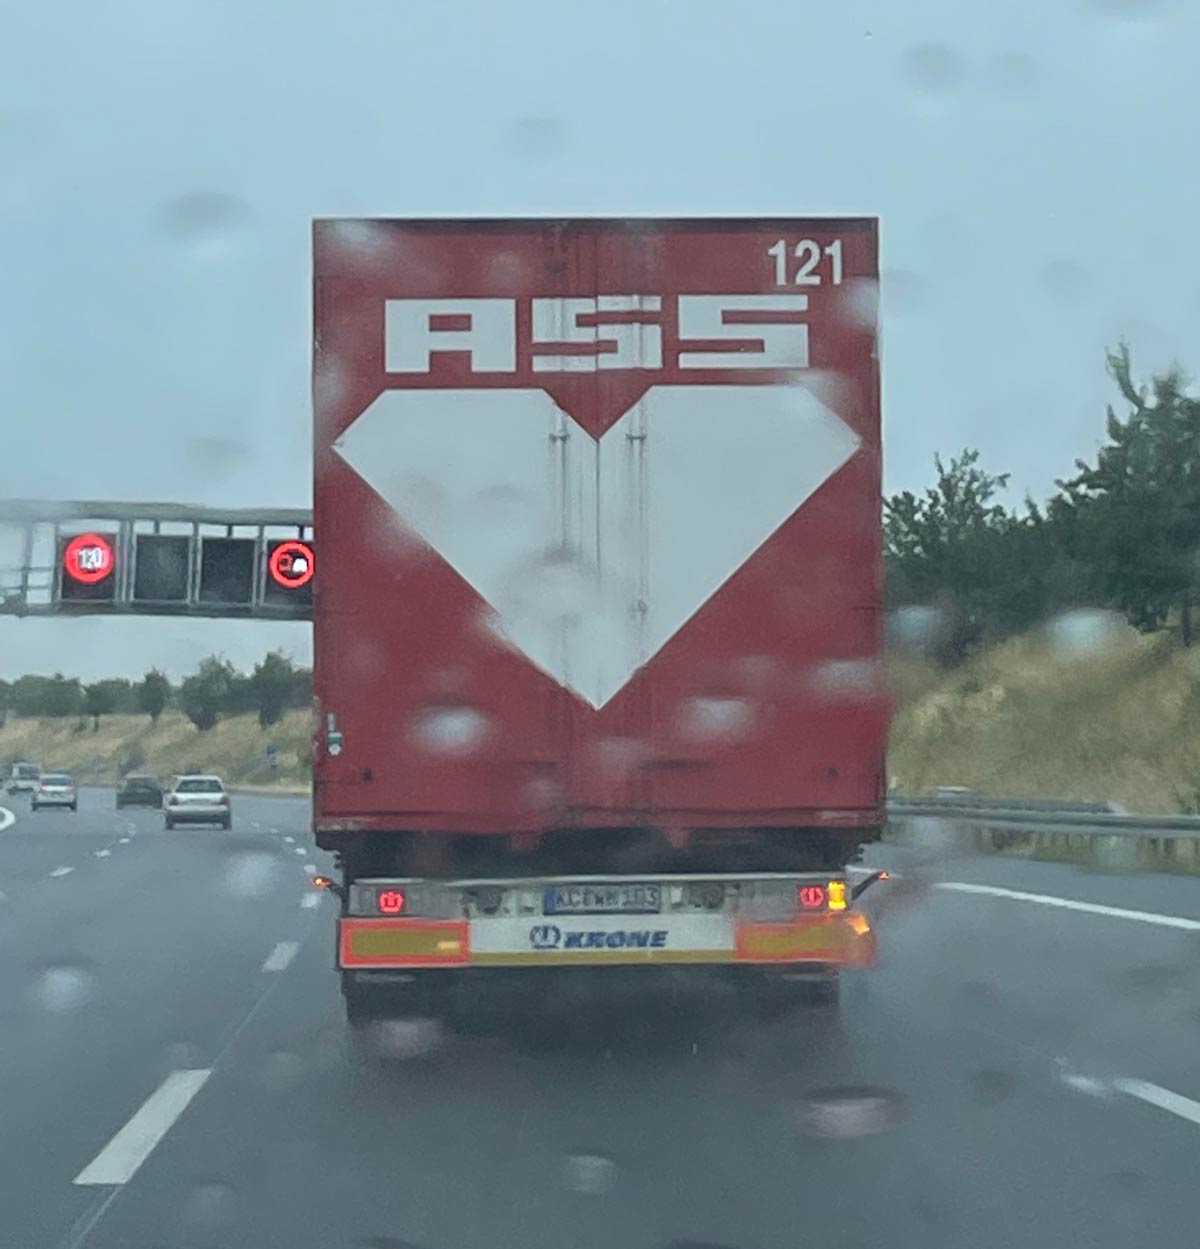 That's a trucking company I can get behind